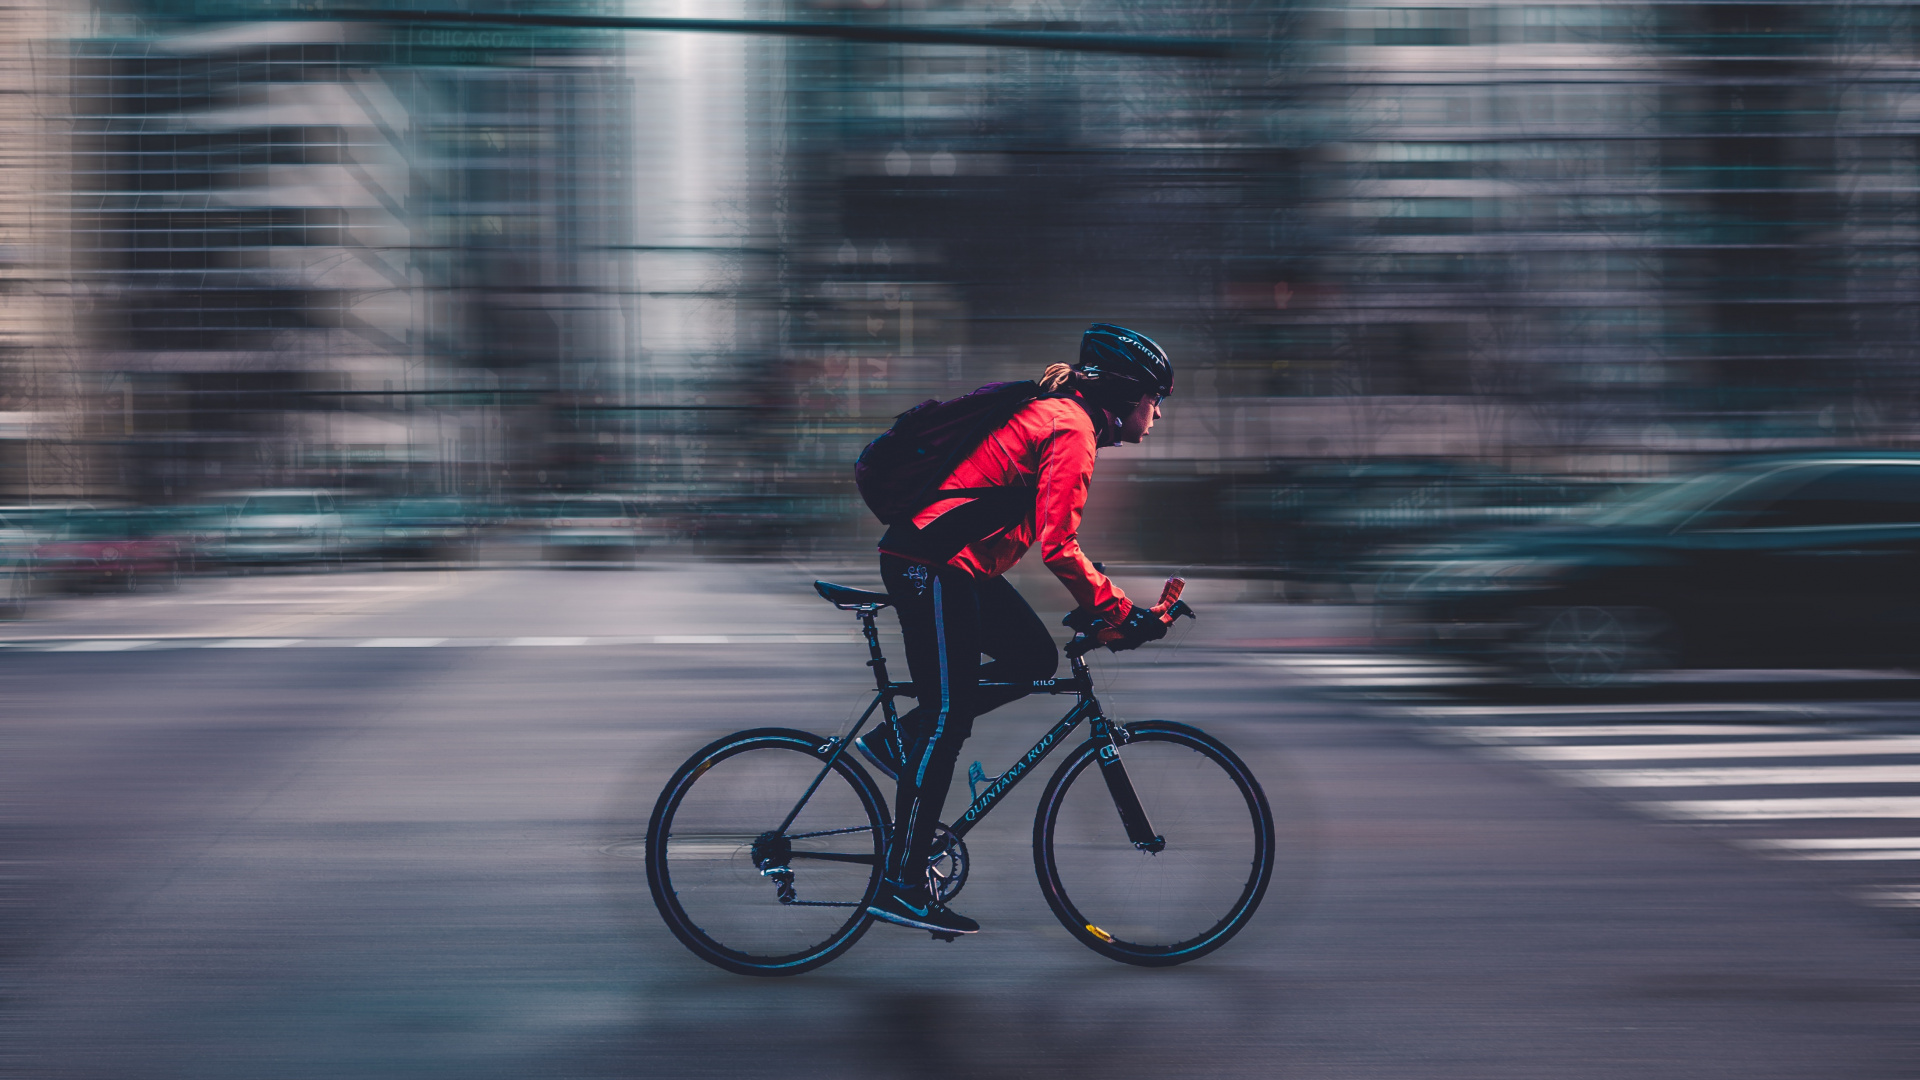 Man in Red Jacket Riding Bicycle on Road During Daytime. Wallpaper in 1920x1080 Resolution